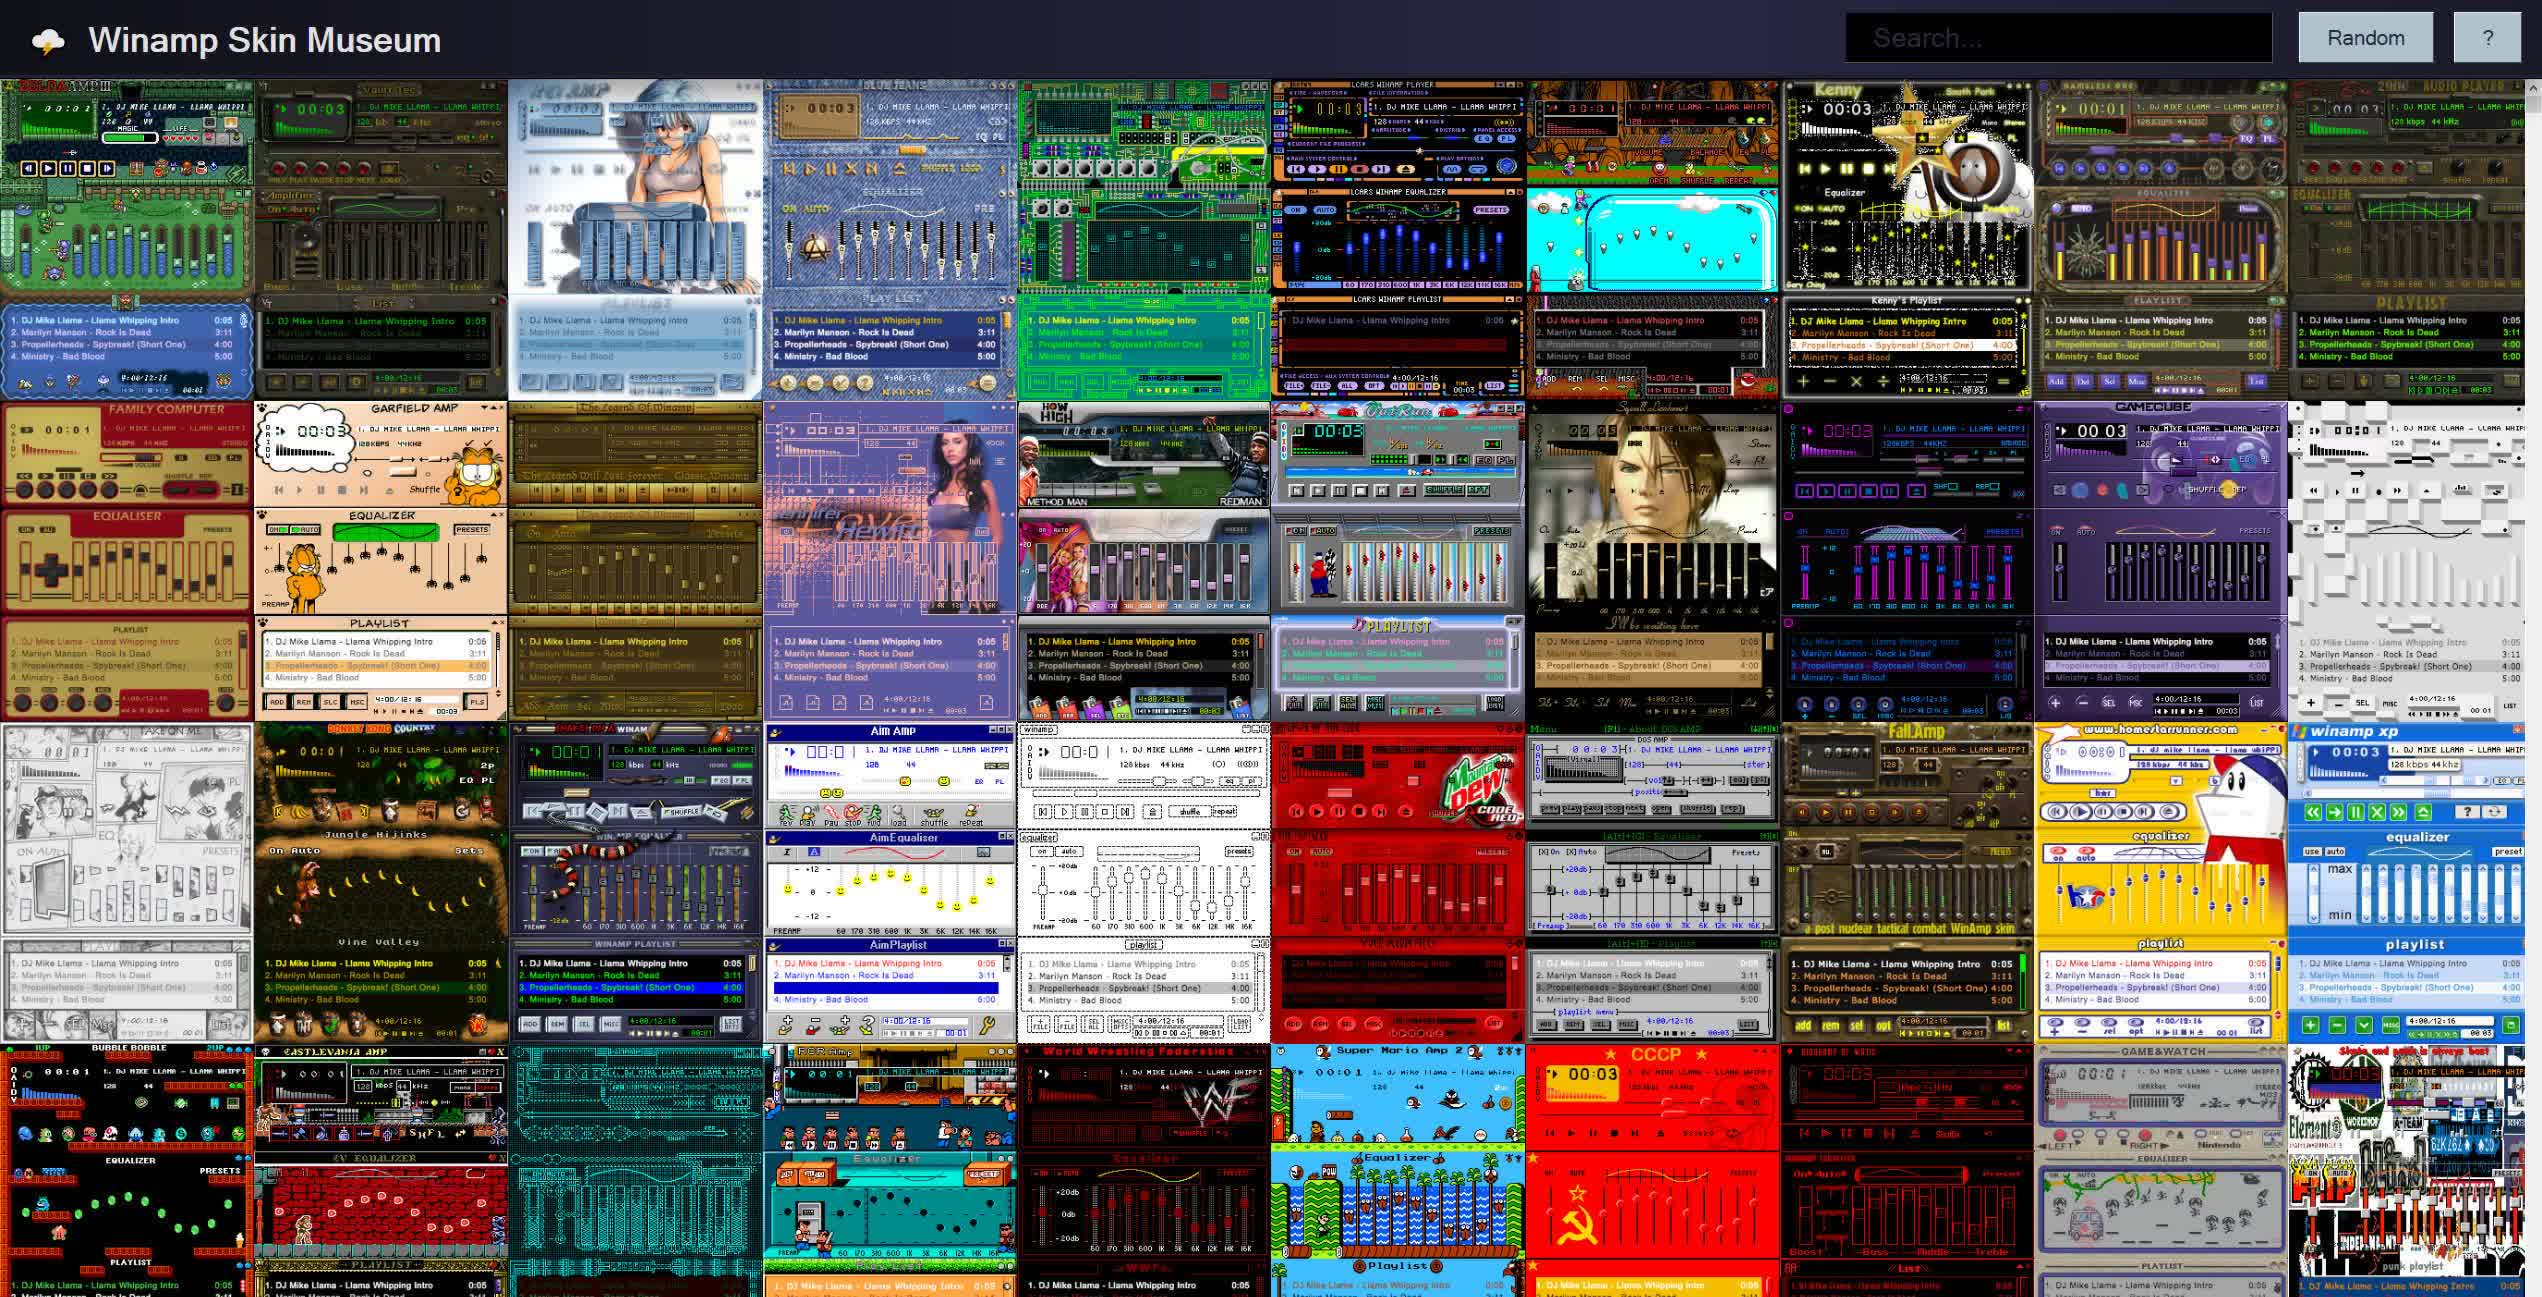 Stop what you're doing and check out the Winamp Skin Museum